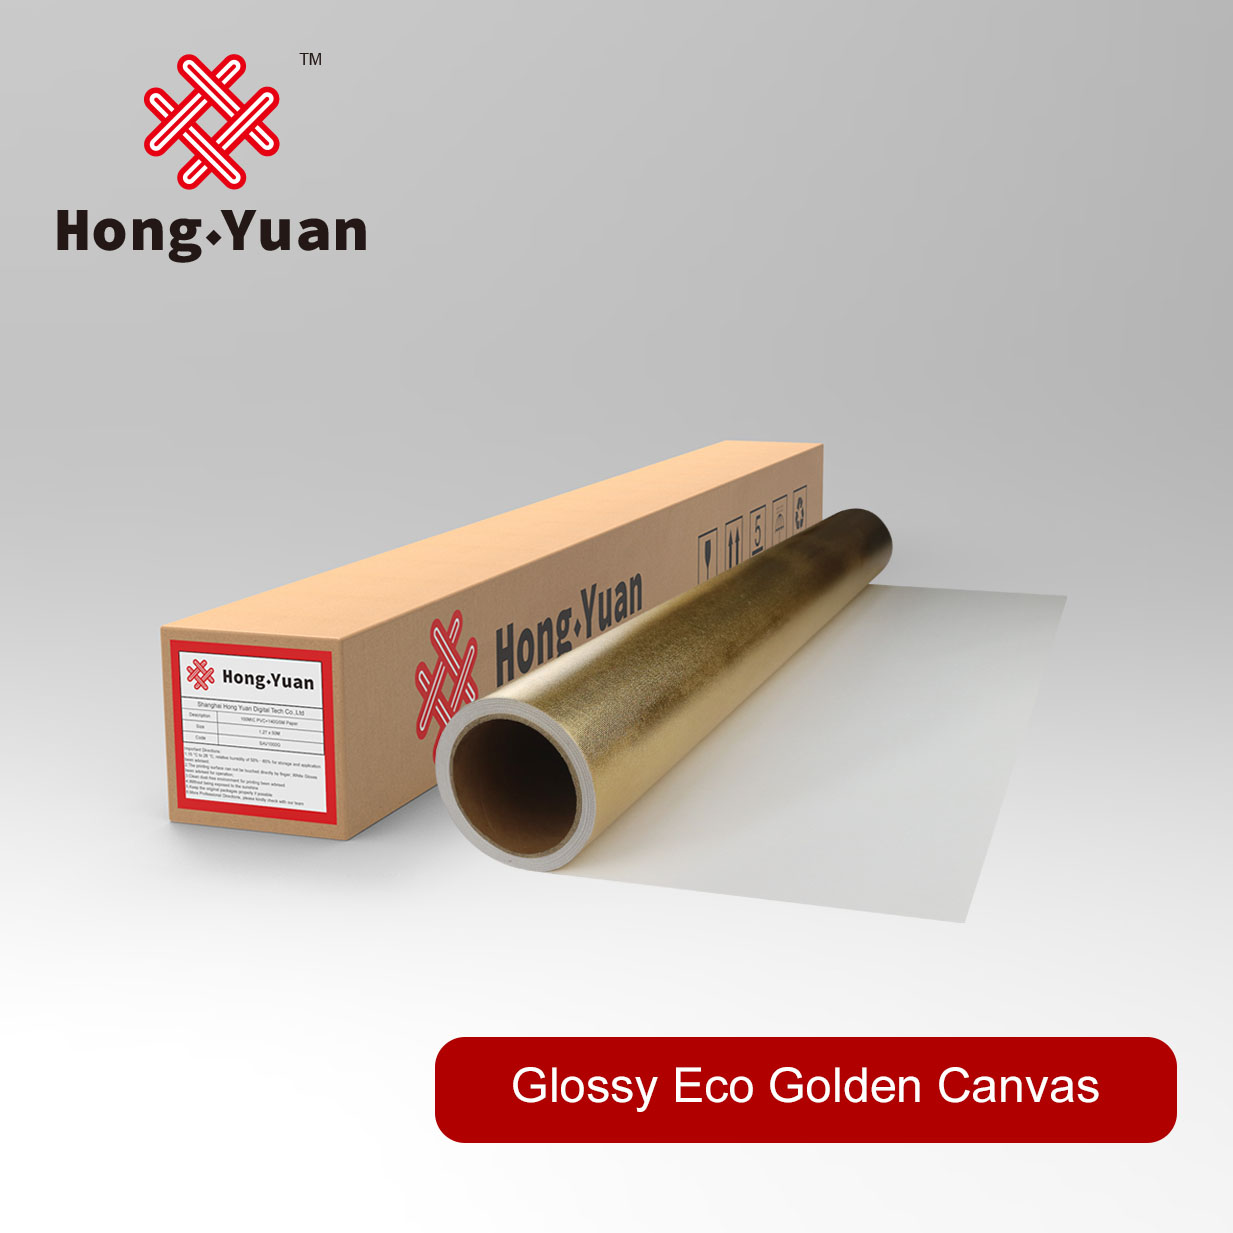 Glossy Eco Golden Canvas EJF300G